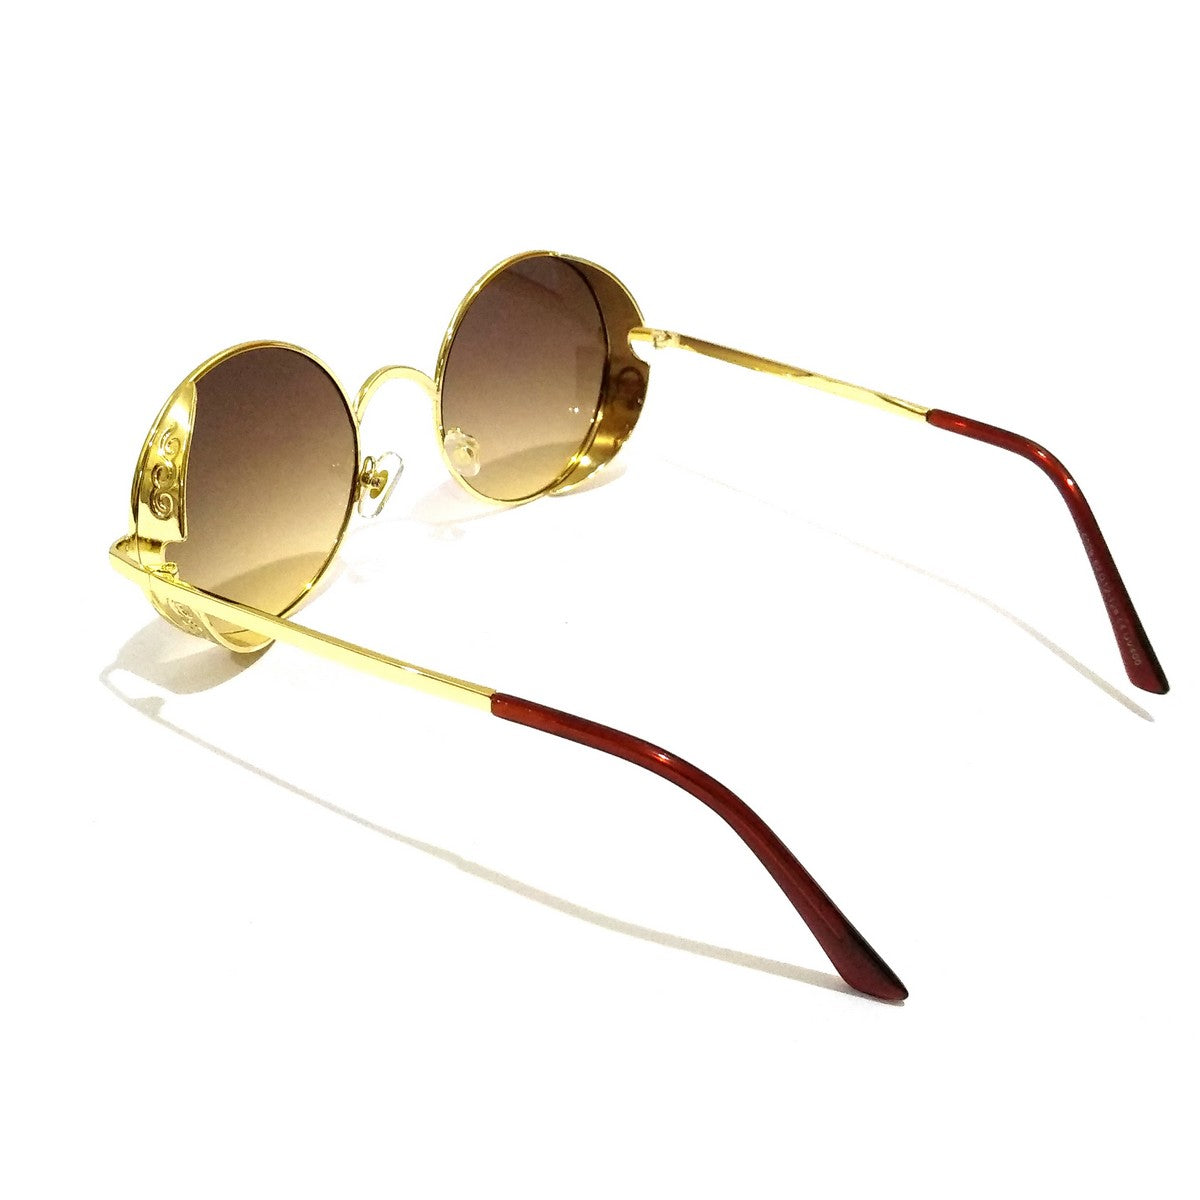 Gold Round Sunglasses Brown Lens